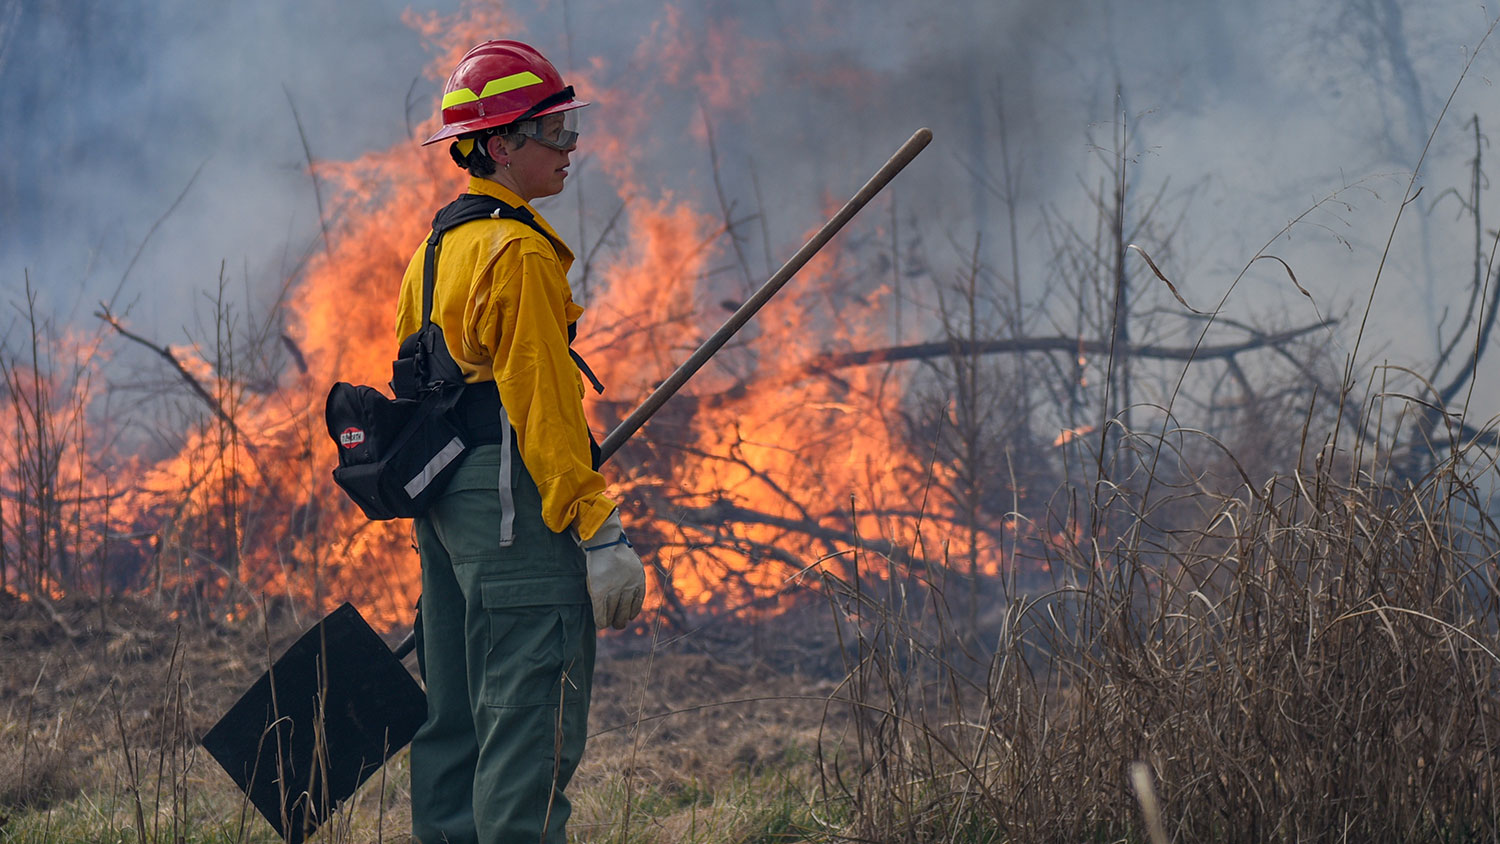 Woman in protective gear and holding a shovel looks at fire and smoke from a controlled burn.